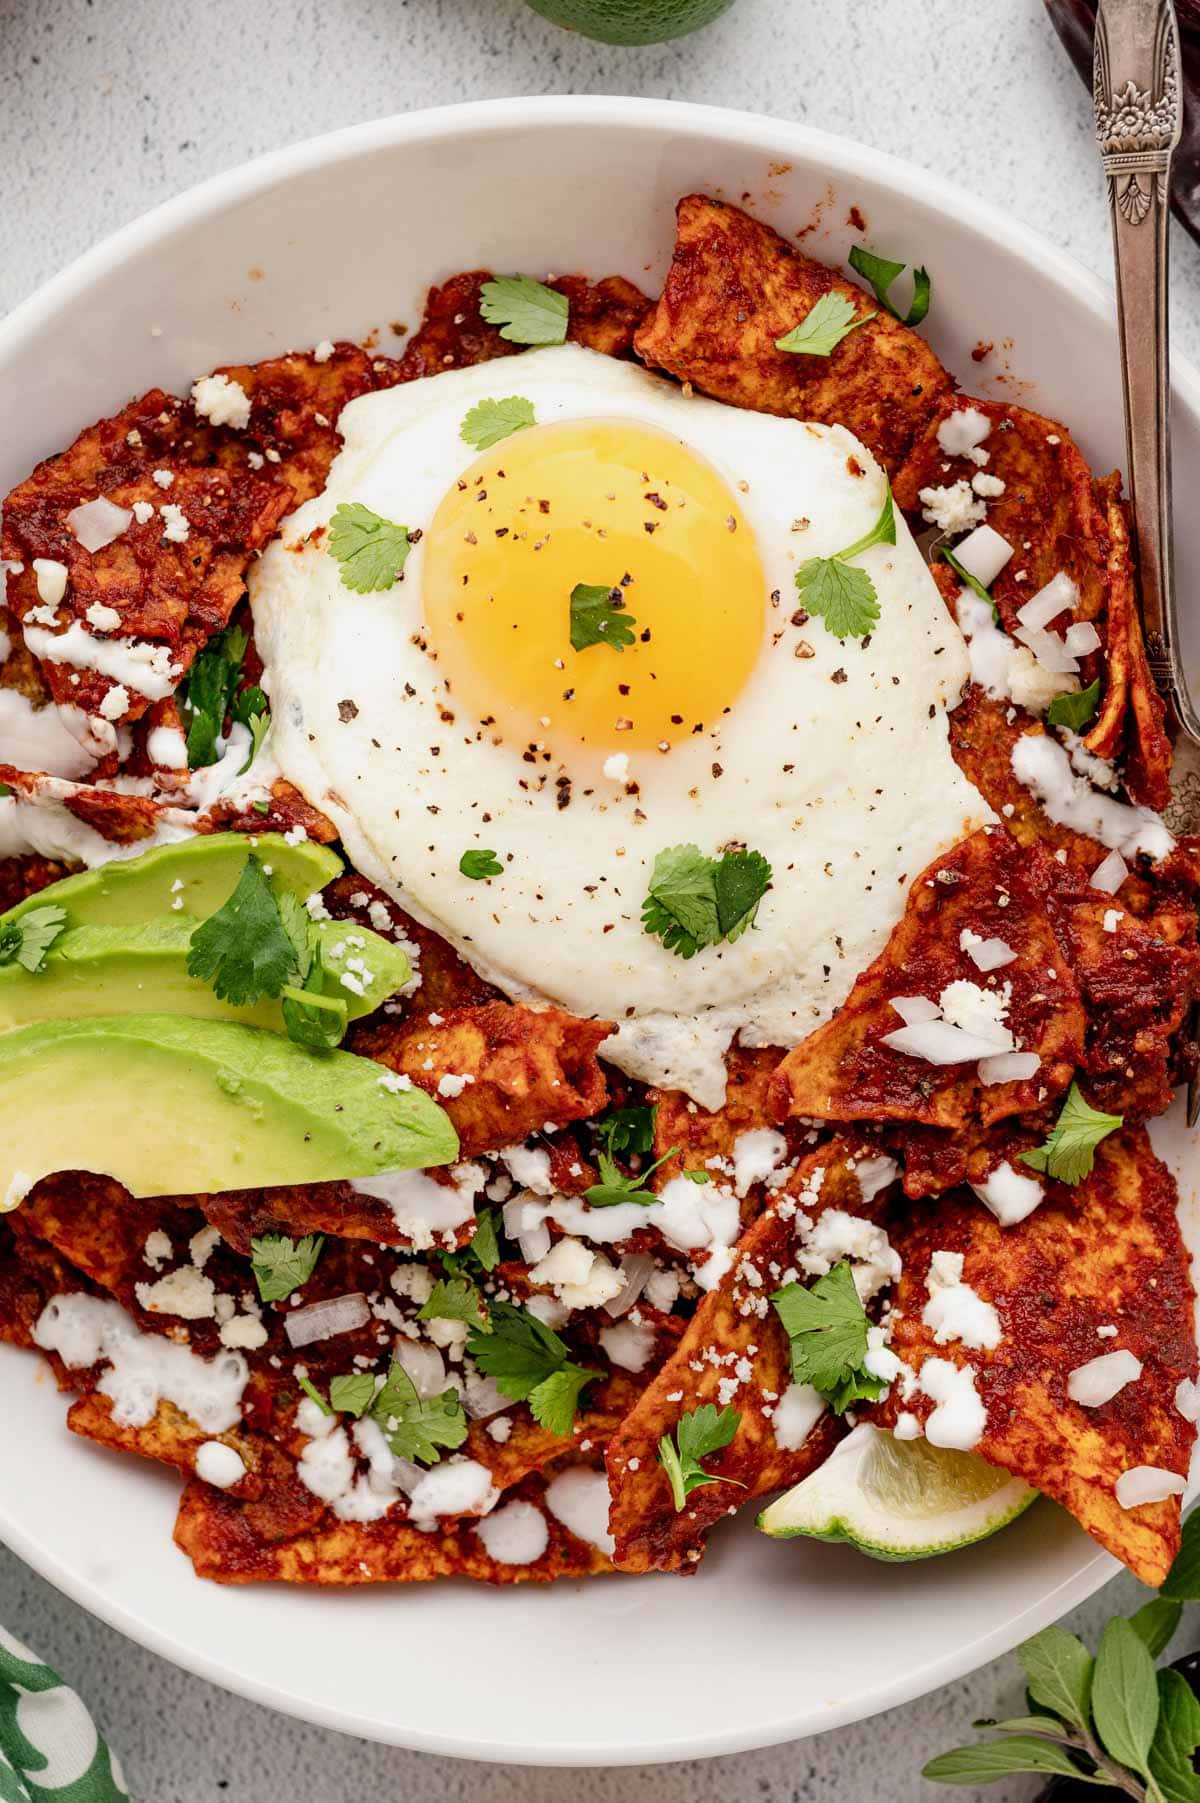 Chilaquiles Rojas topped with fried egg, avocado and cotija cheese.